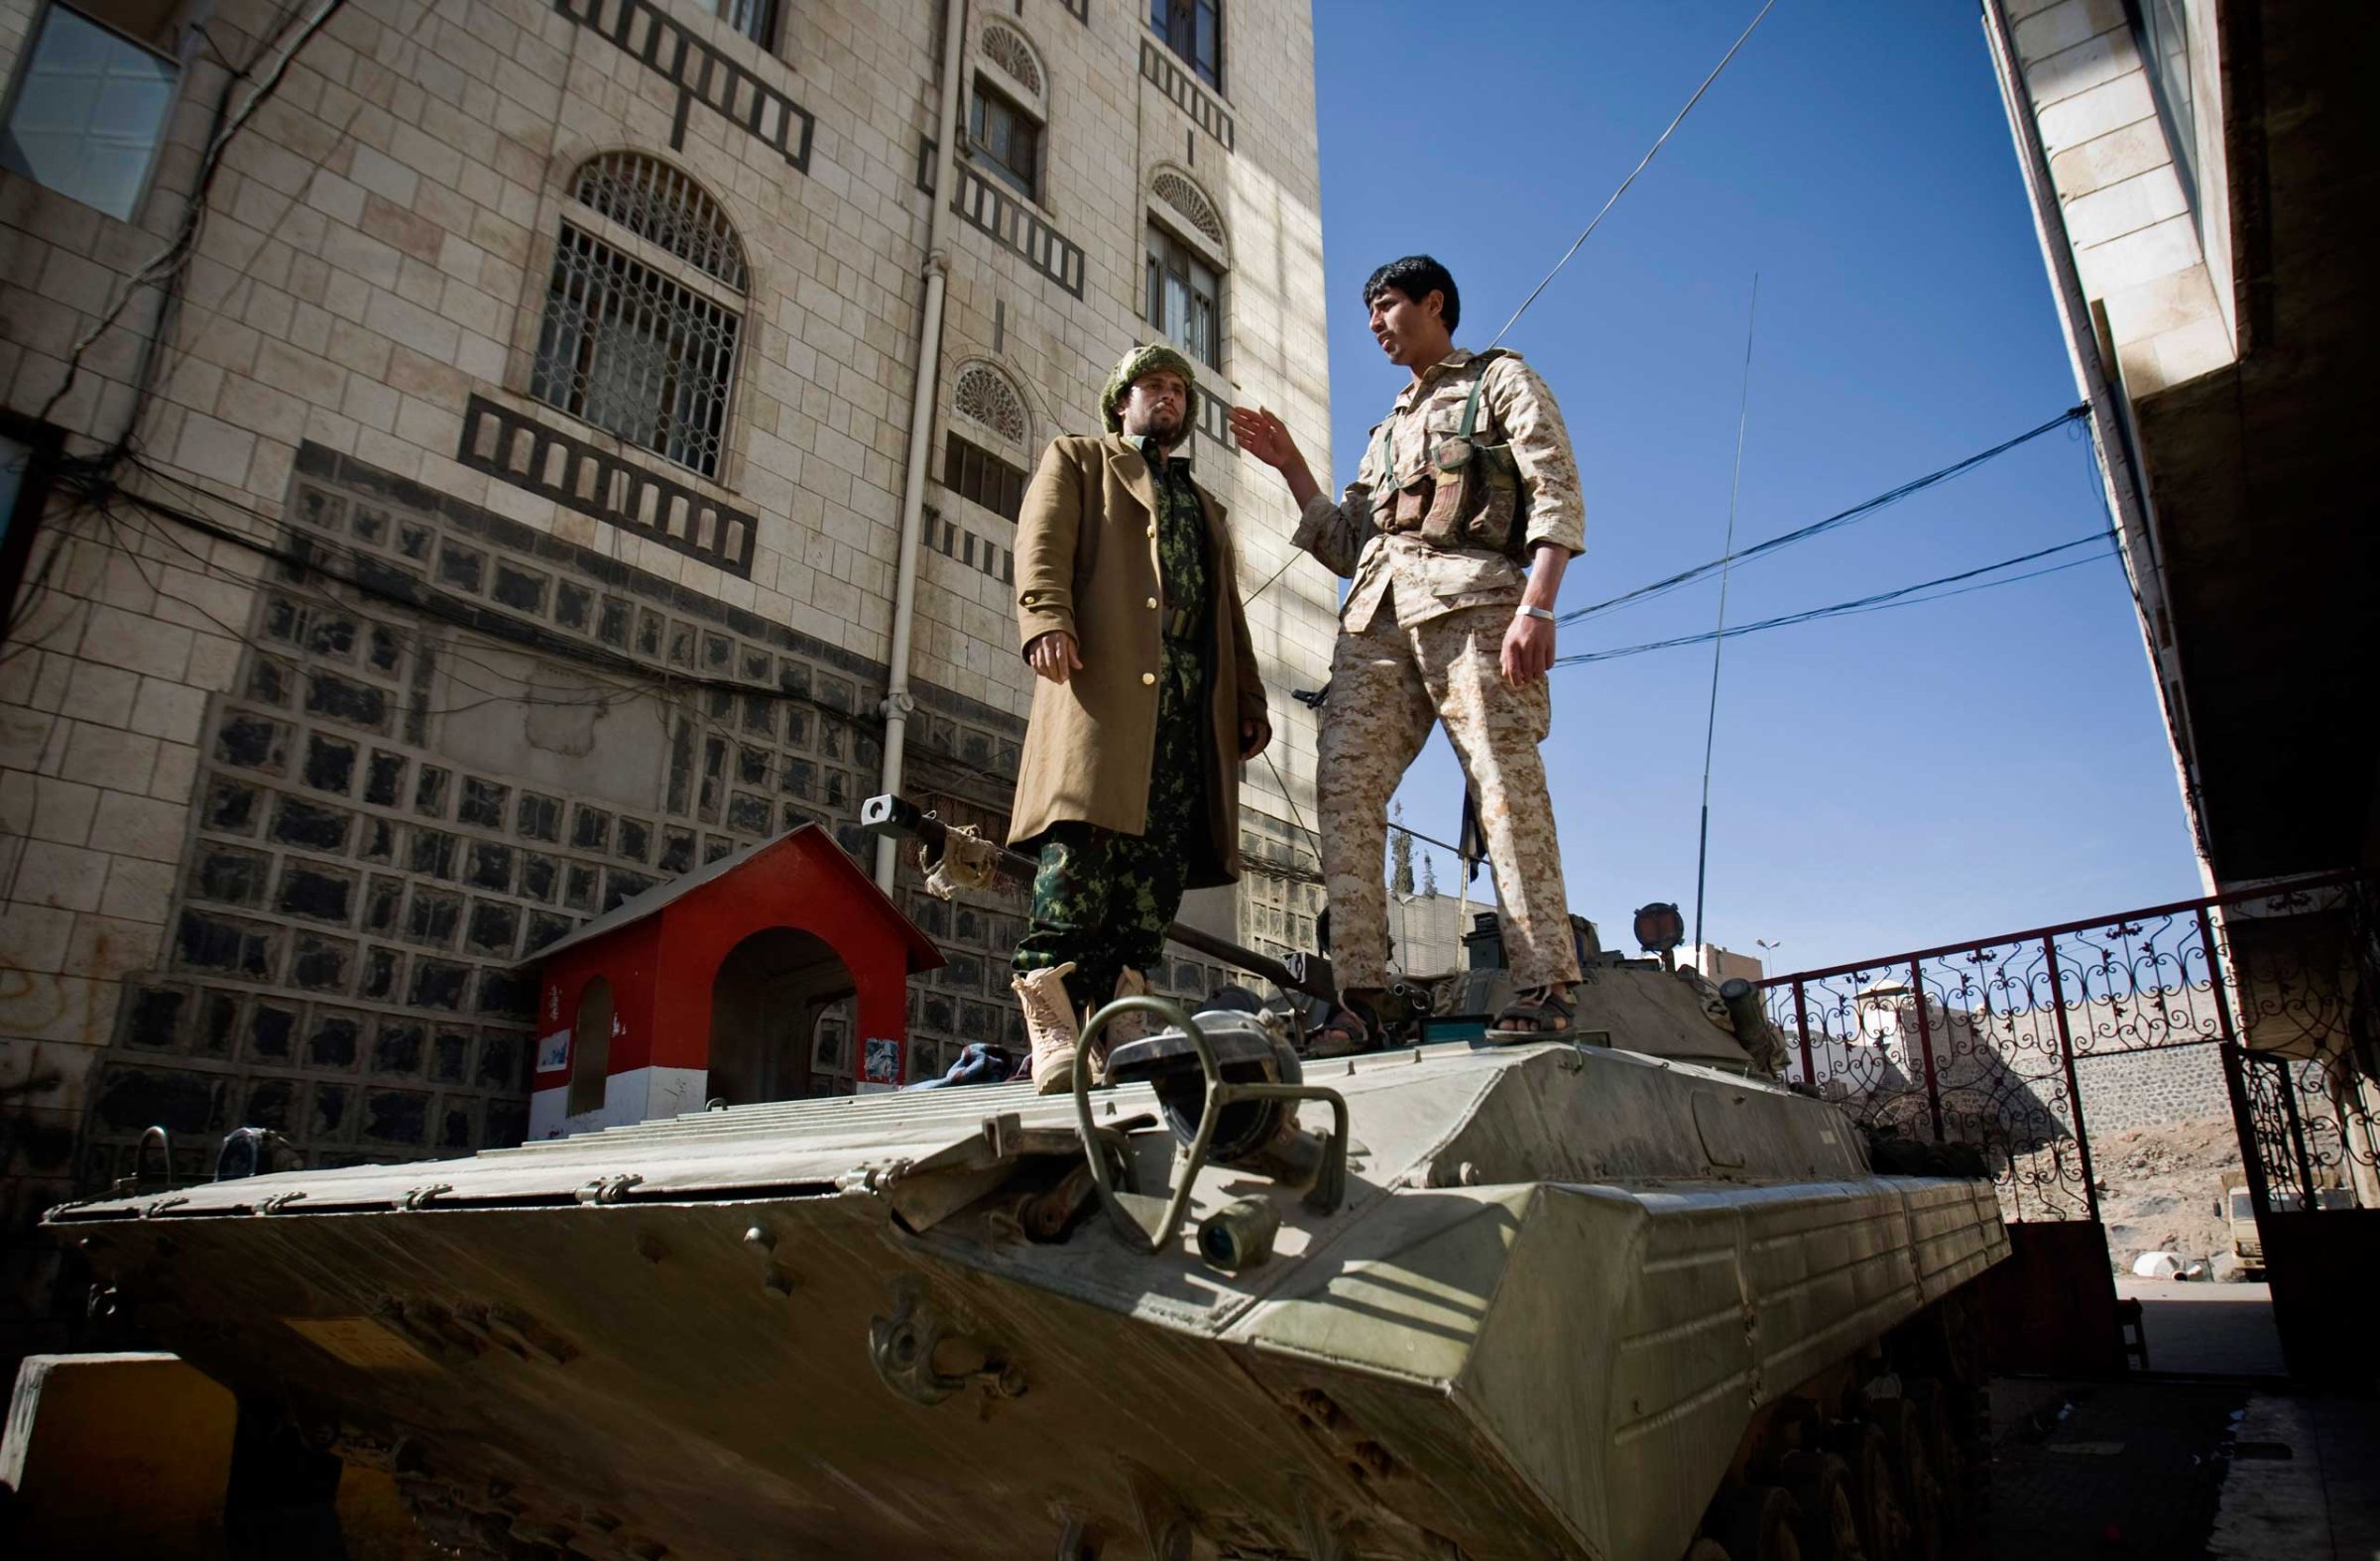 Houthi Shiite Yemeni wearing army uniforms stand atop an armored vehicle, which was seized from the army during recent clashes, outside the house of Yemen's President Abed Rabbo Mansour Hadi in Sanaa, Yemen, Jan. 22, 2015.